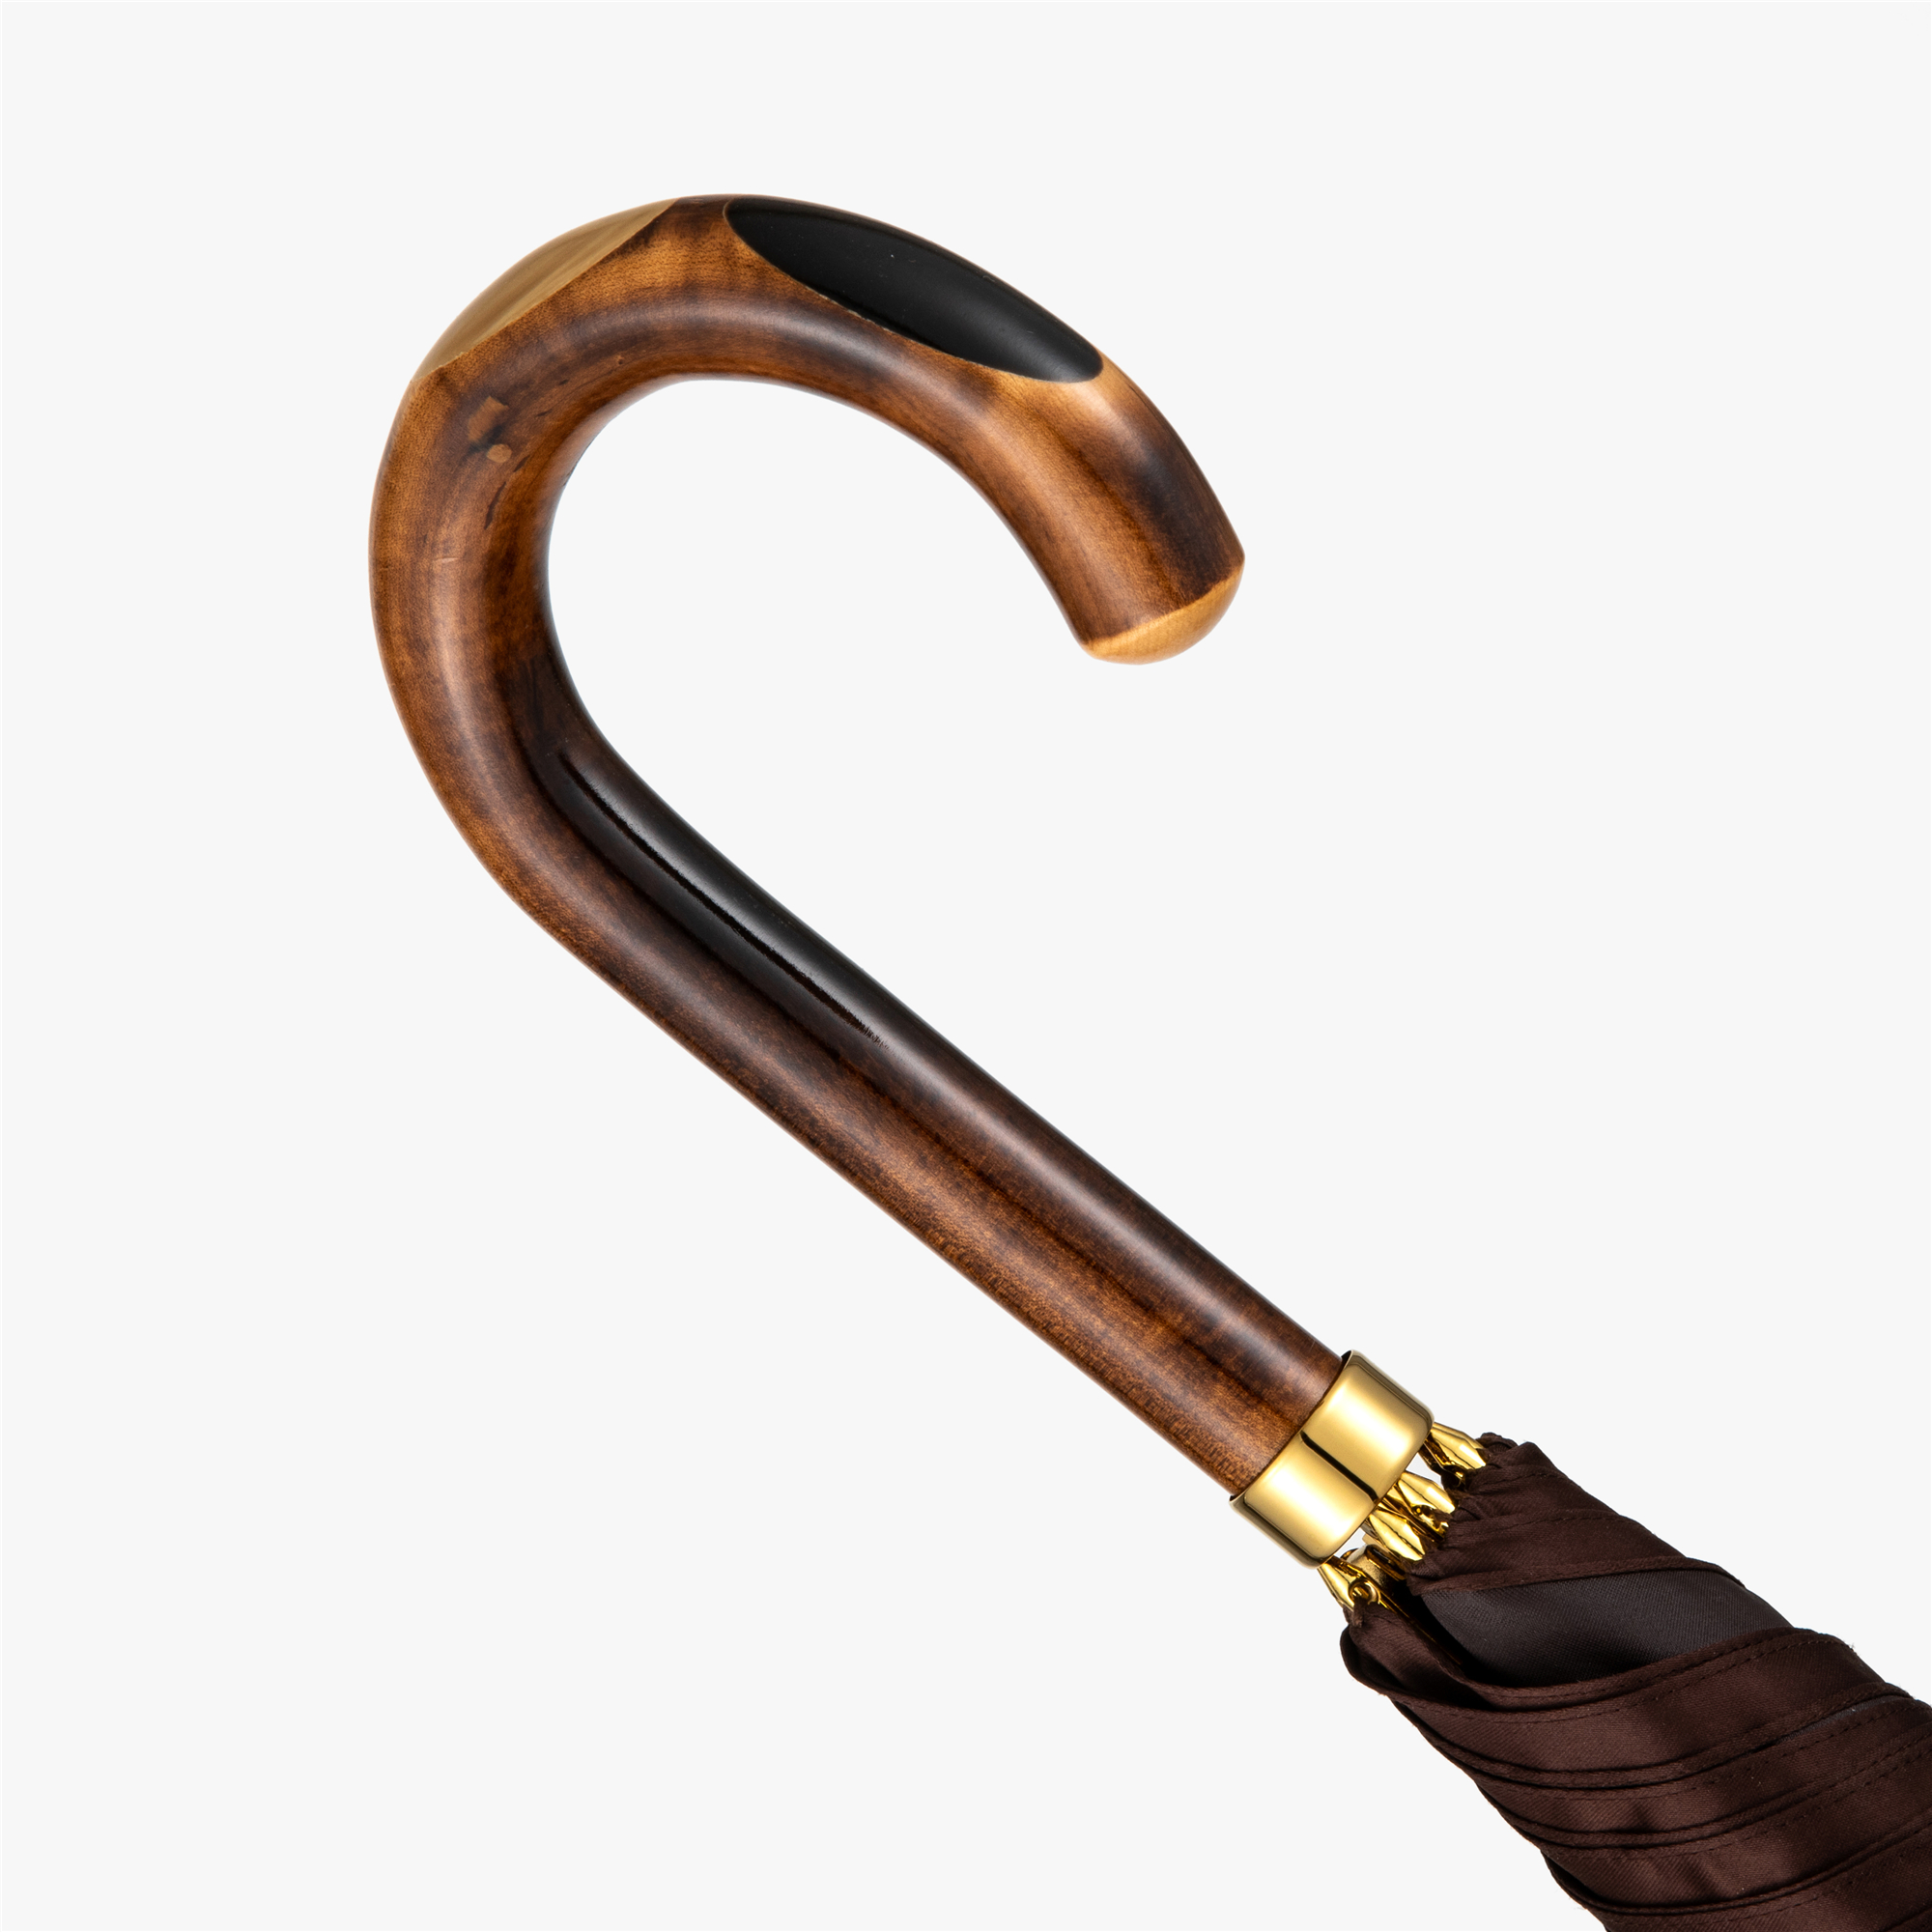 Maple ox horn umbrella with straight handle